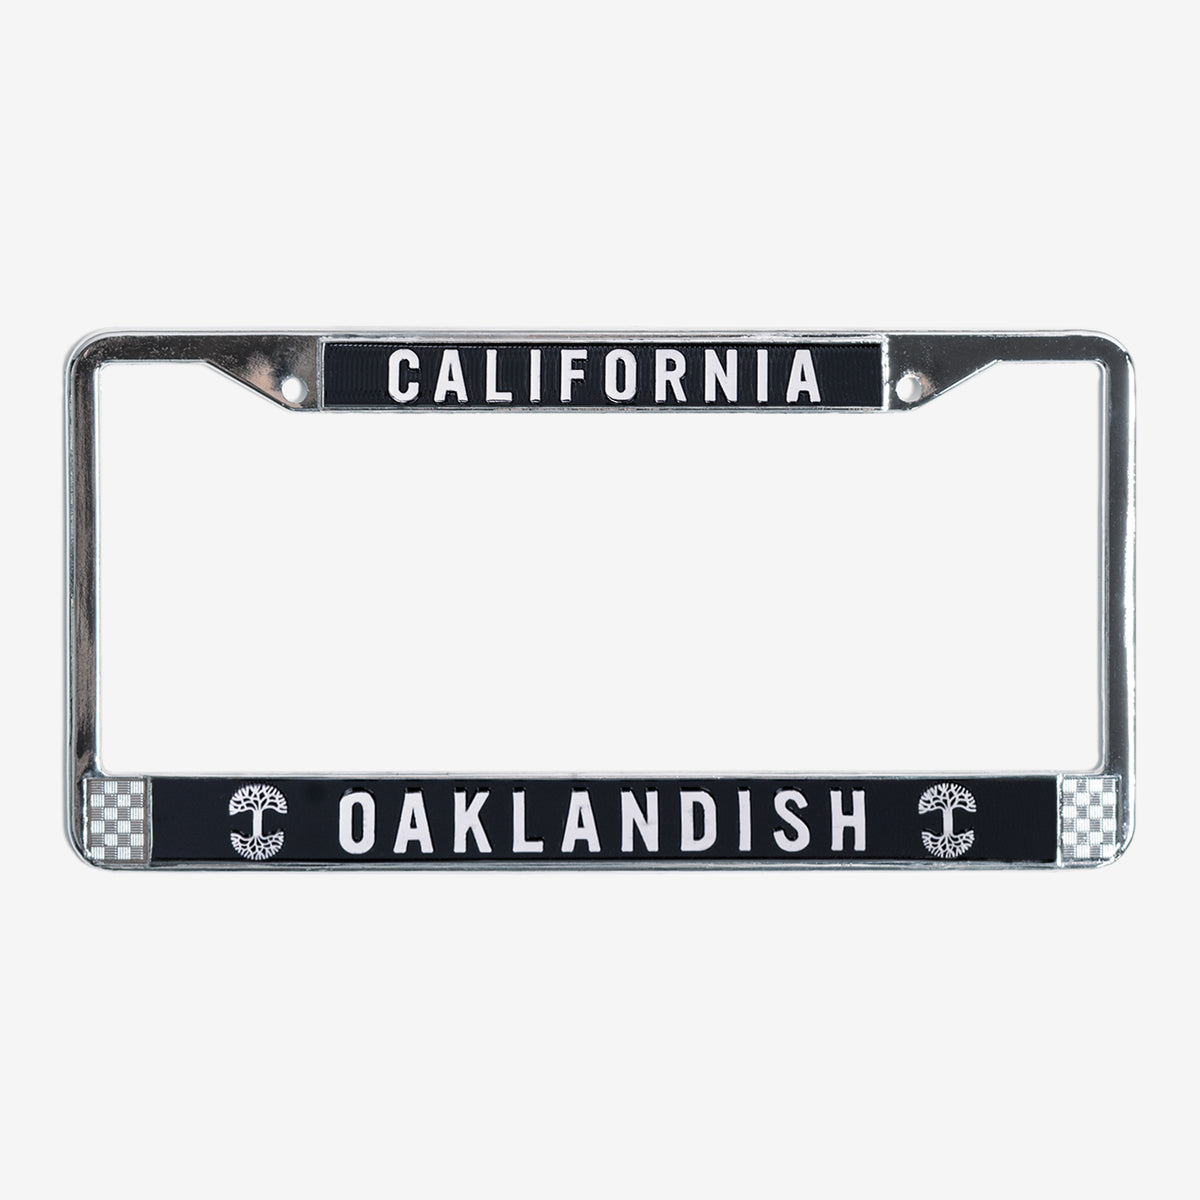 License plate holder with black rims with silver California wordmark on top and Oaklandish wordmark and tree logo on the bottom.